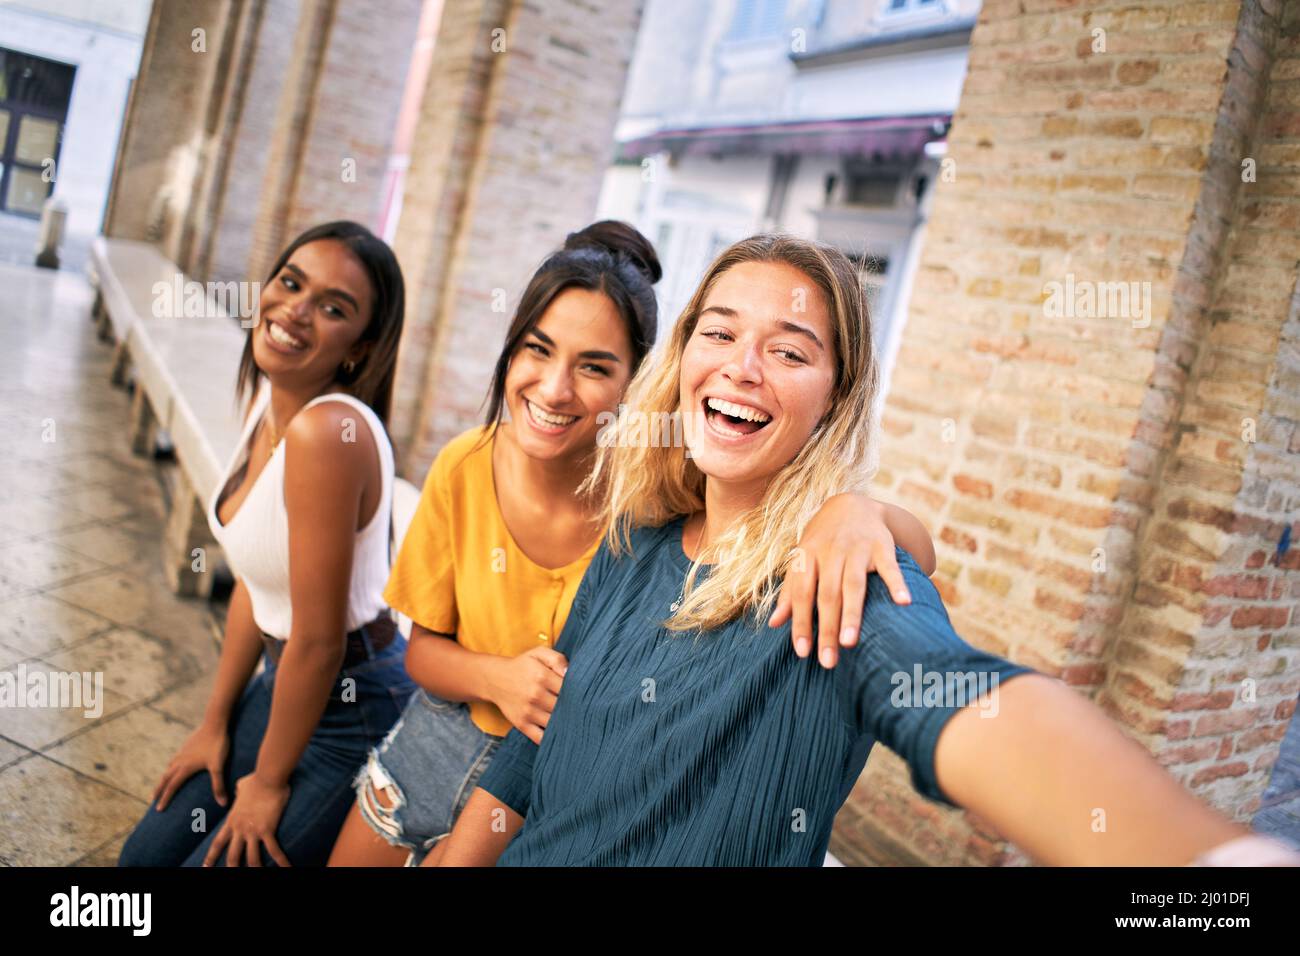 Happy woman taking a funny selfie and laugh good. Stock Photo